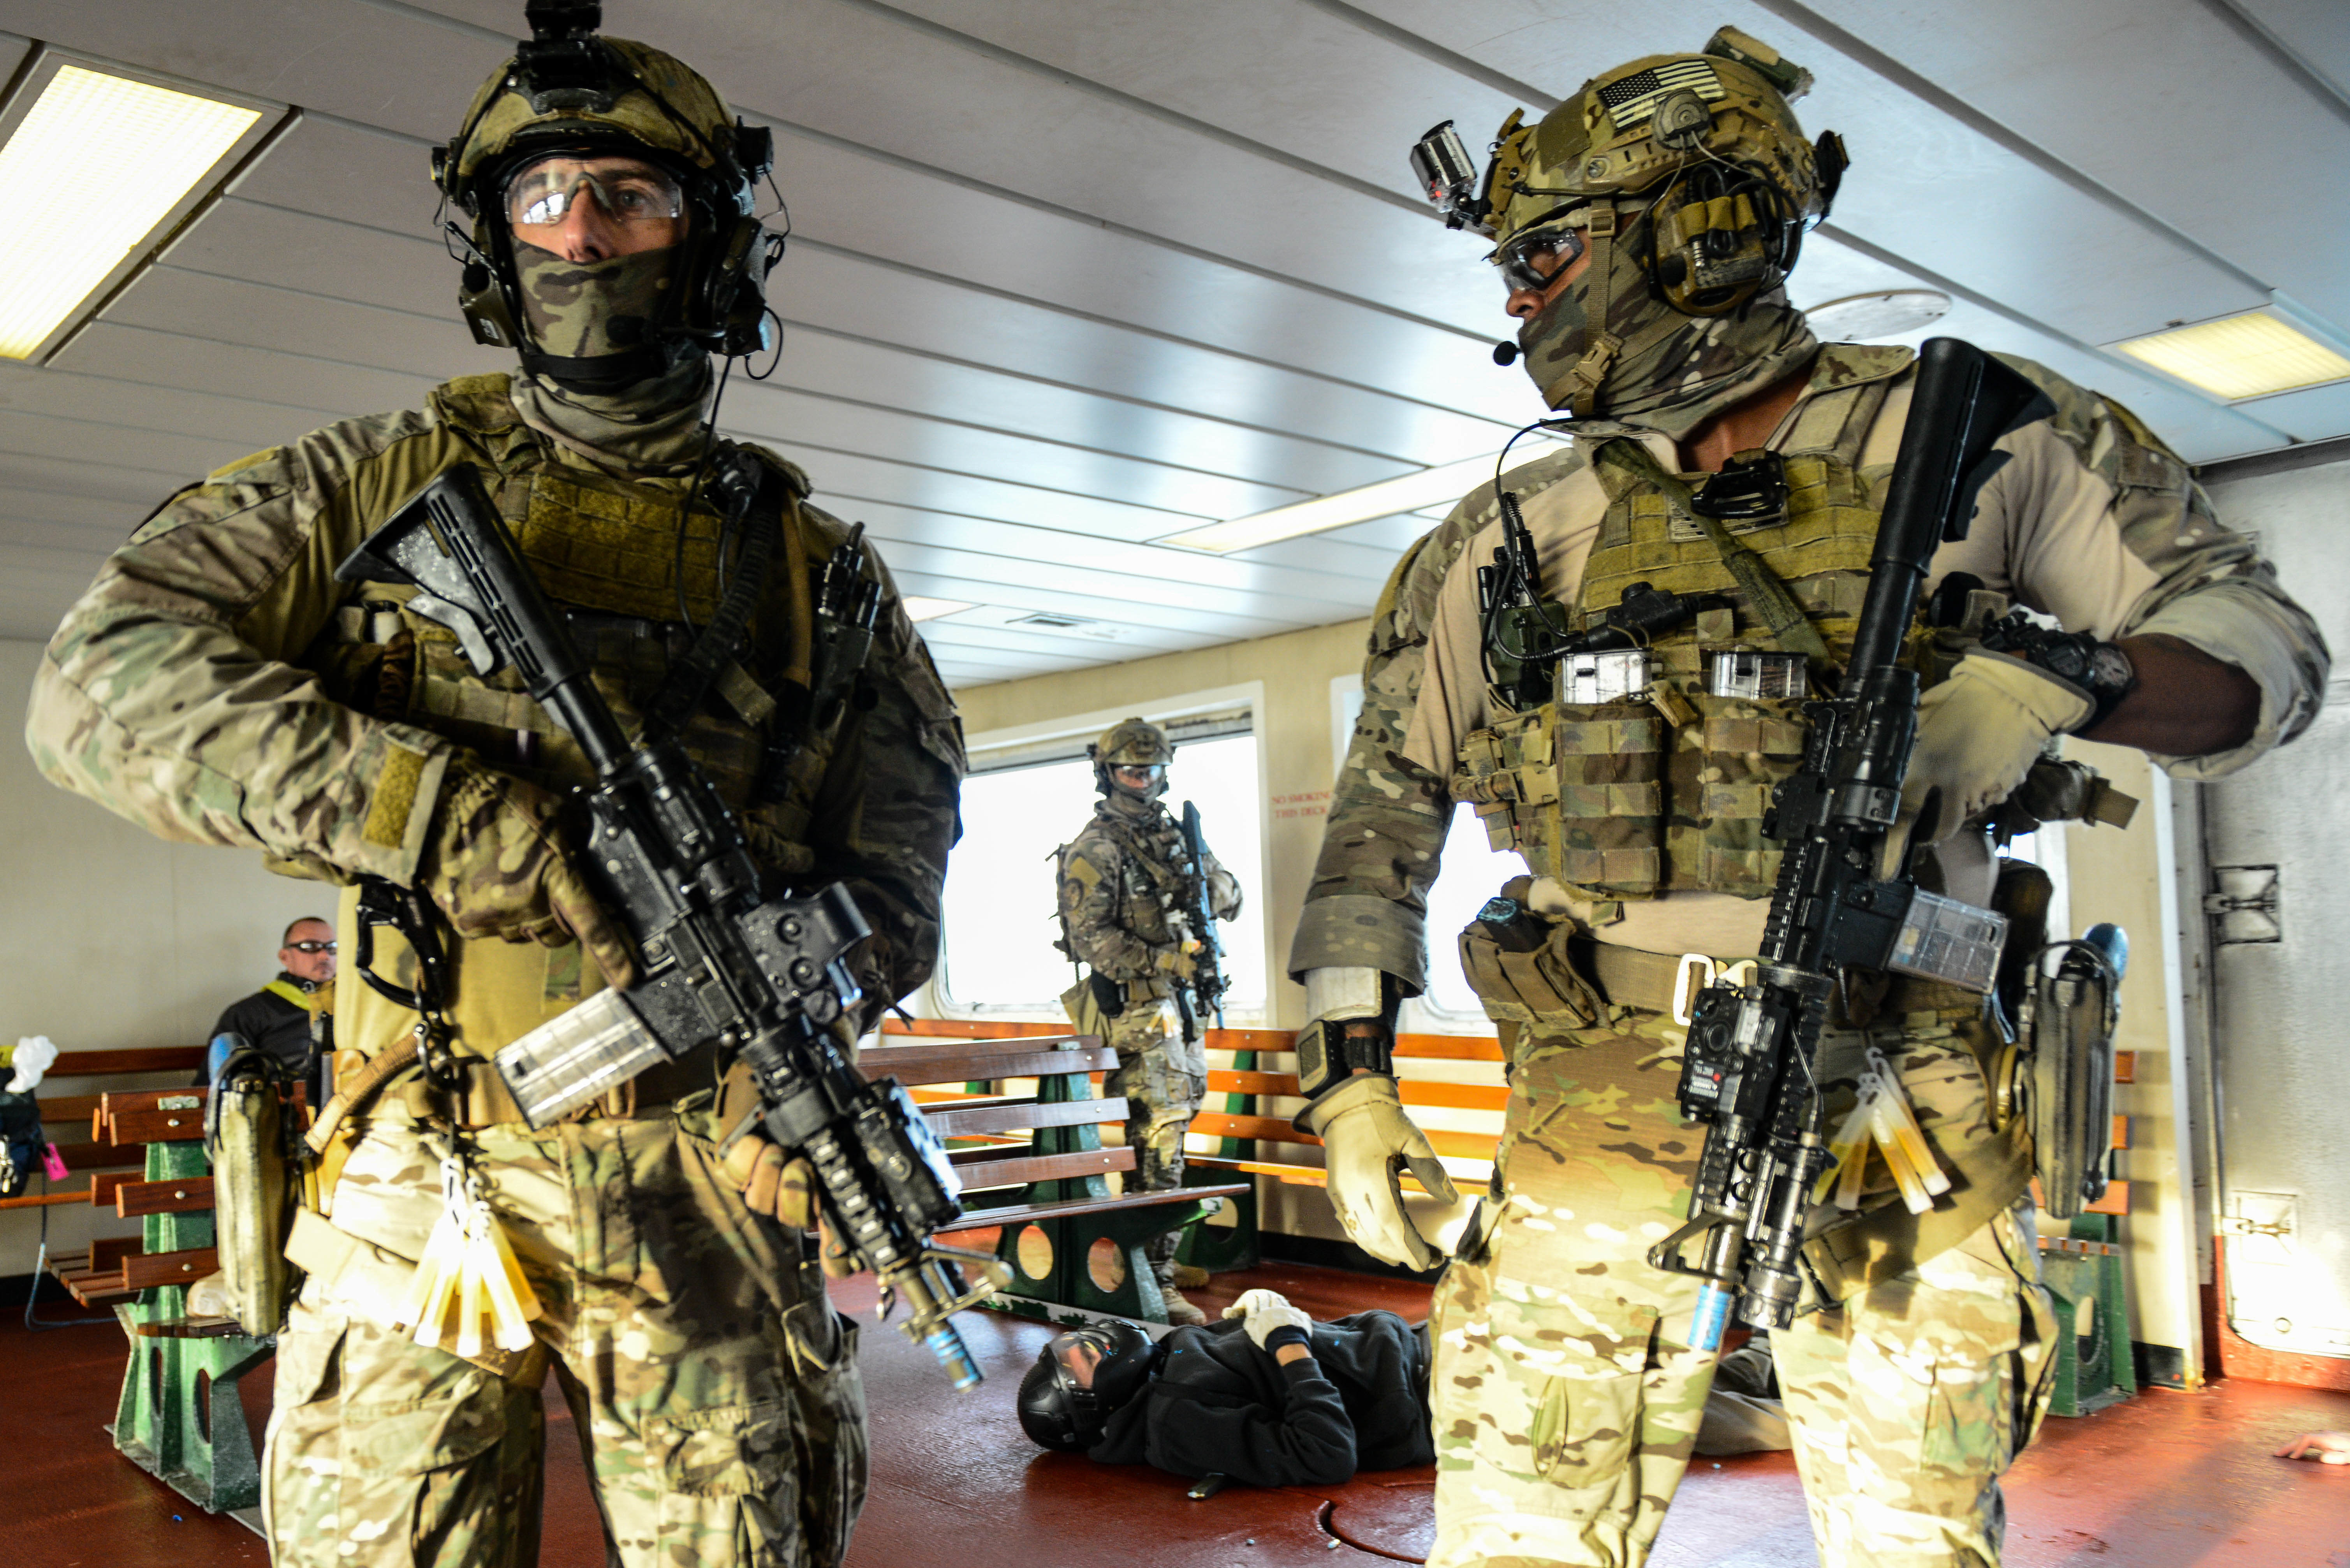 The Coast Guard’s Maritime Security Response Team (MSRT) from Virginia participates in a training evolution in Hyannis, Mass., Thursday, Oct., 22, 2015. The highly trained and specialized team, using a real-world underway ferry, practiced tactical boardings-at-sea, active shooter scenarios, and detection of radiological material. (U.S. Coast Guard photo by Petty Officer 3rd Class Ross Ruddell)